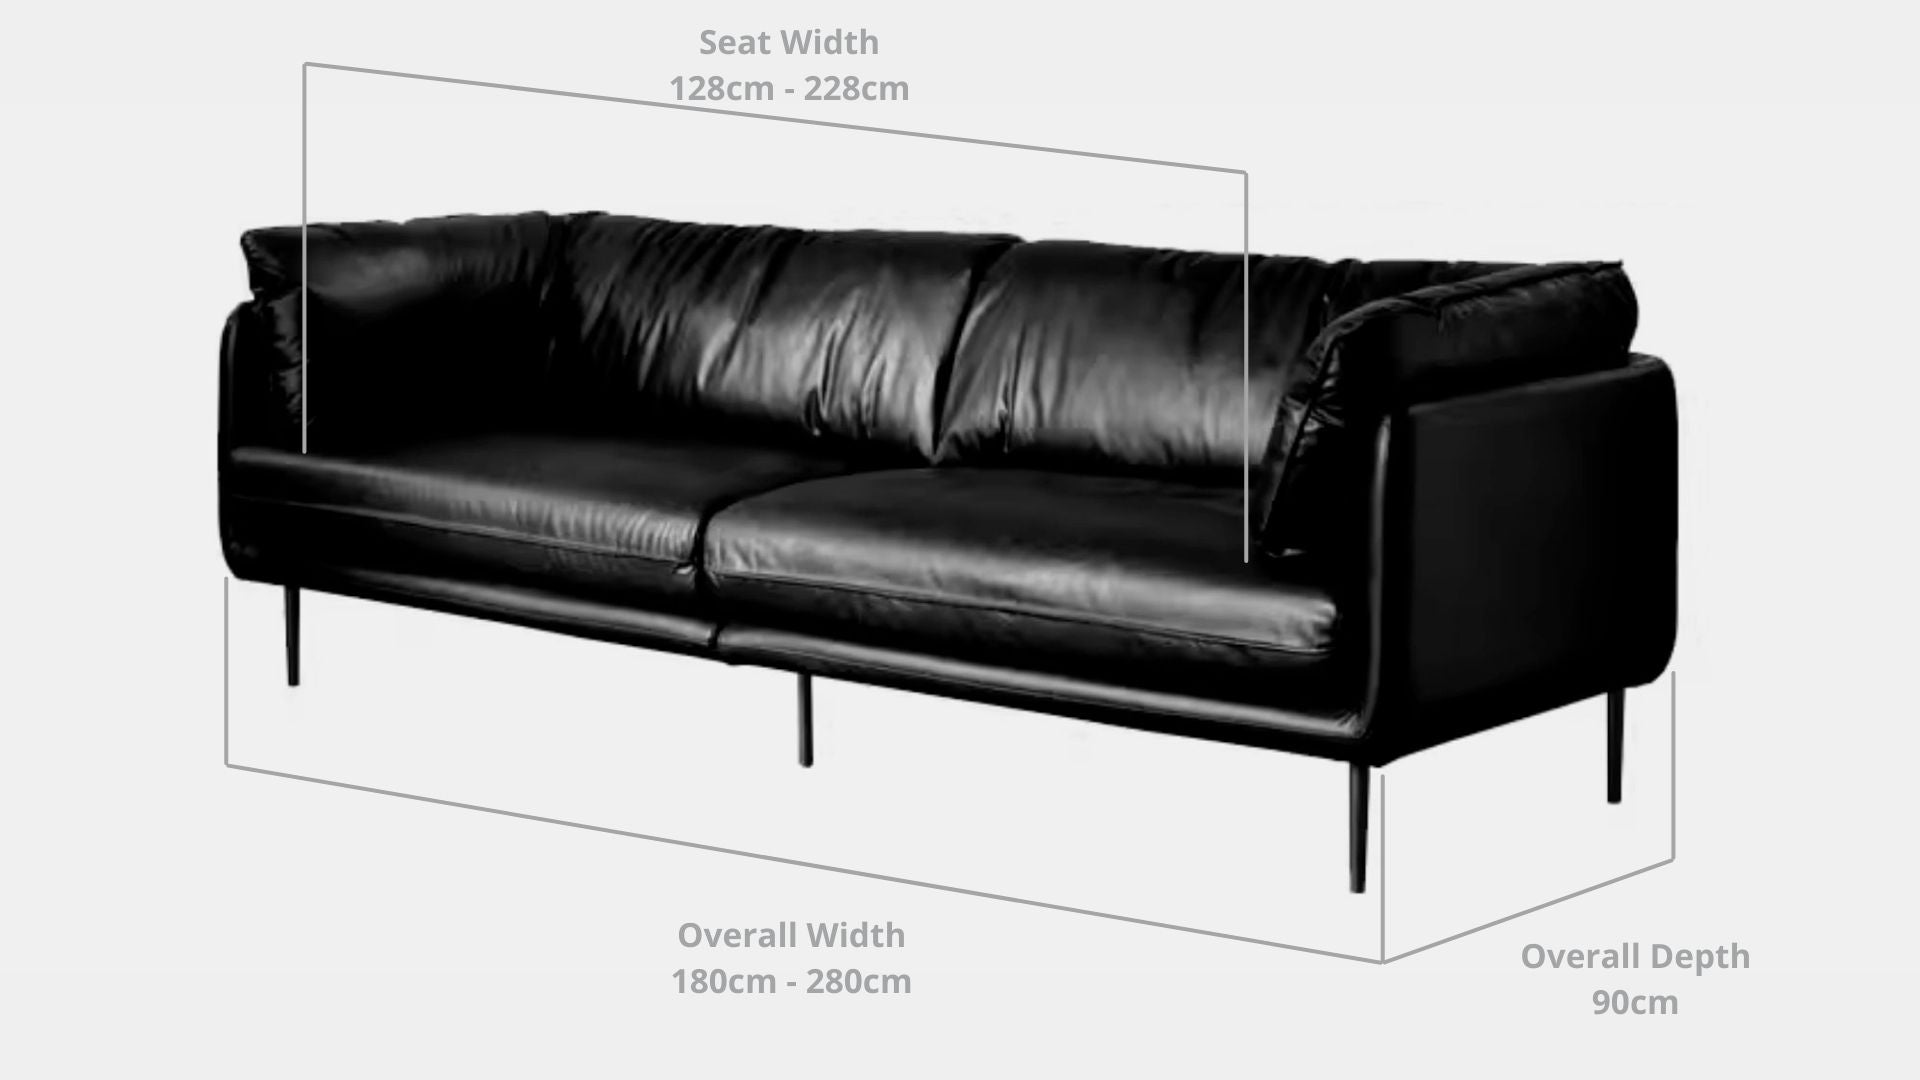 Details the key dimensions in terms of overall width, overall depth and seat width for Cuddle Full Leather Sofa